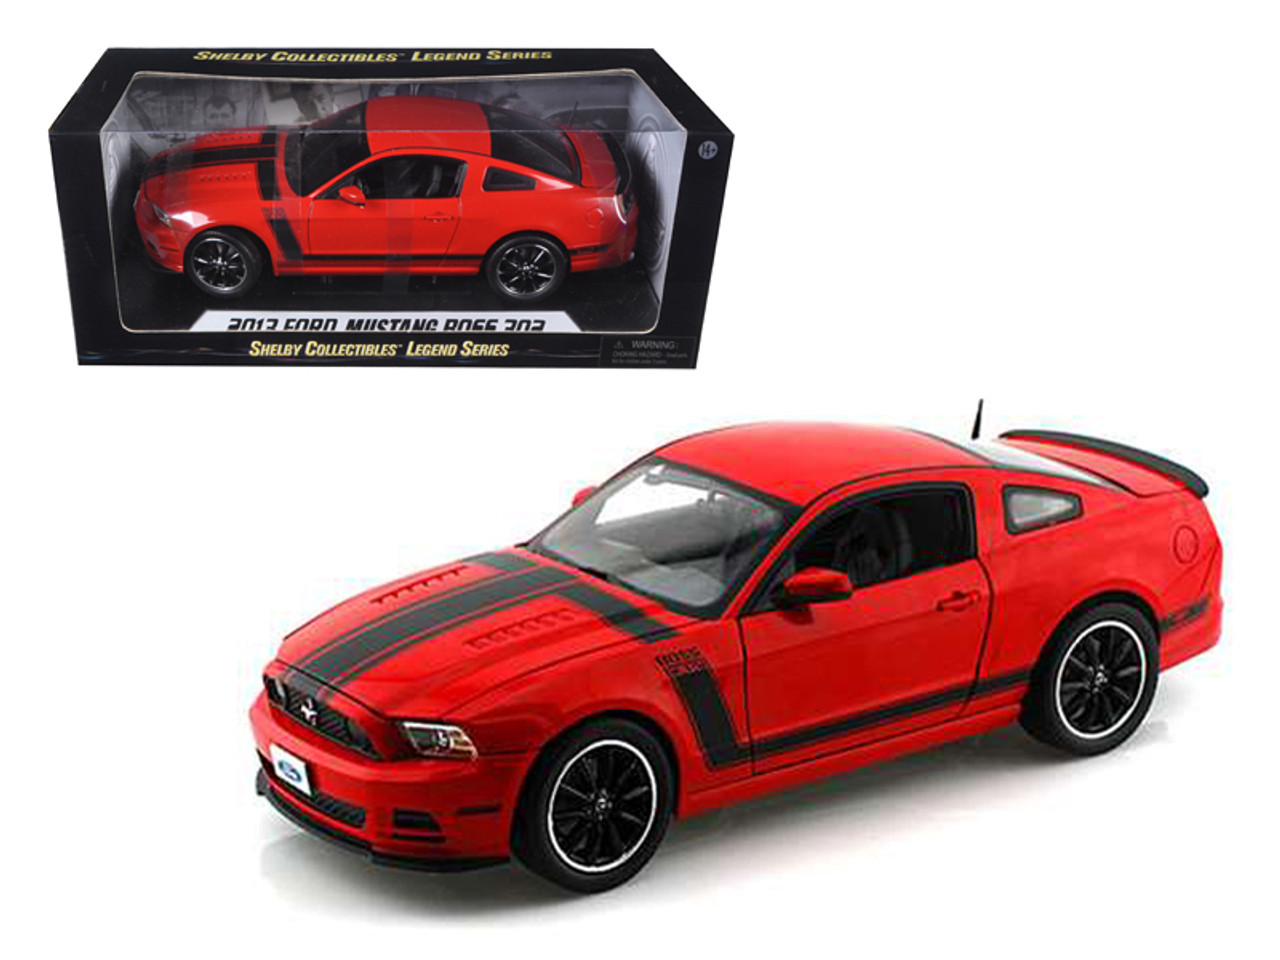 Damaged 2013 Ford Mustang Boss 302 Red with Black Stripes 1/18 Diecast Model Car by Shelby Collectibles